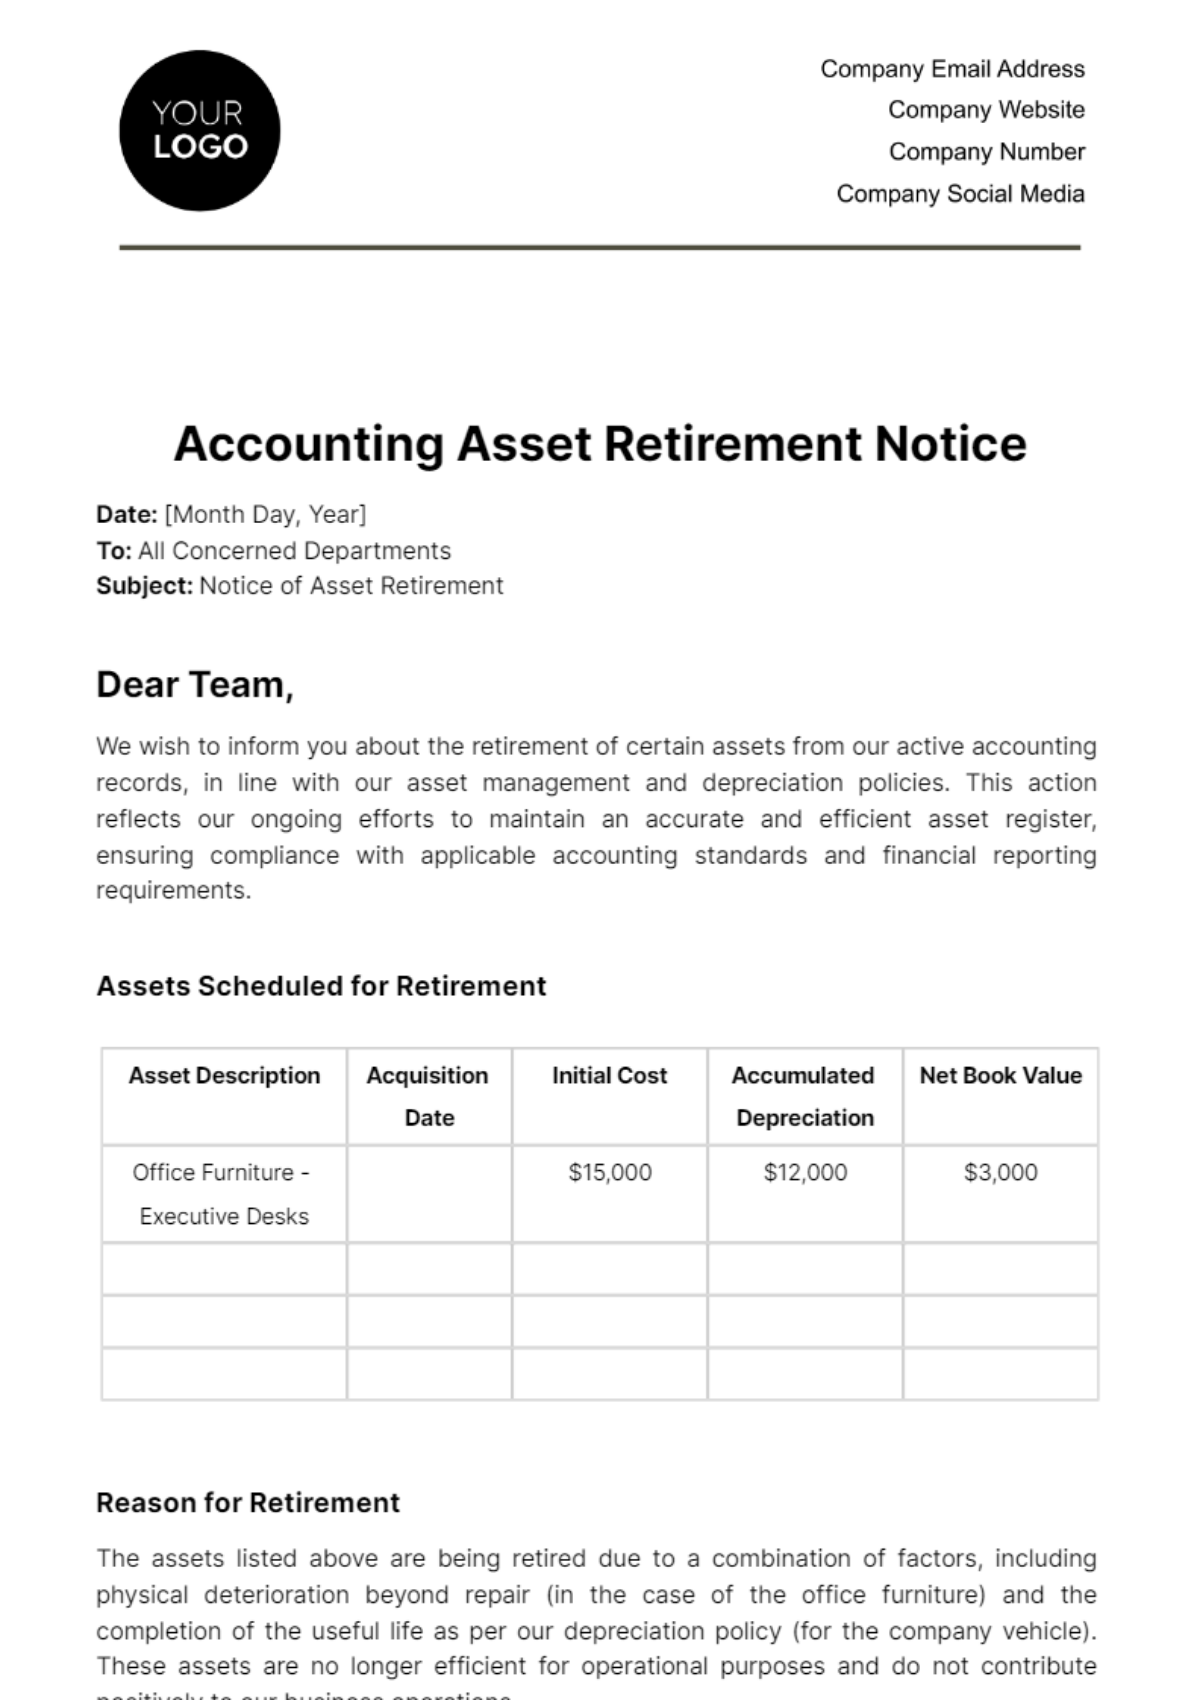 Free Accounting Asset Retirement Notice Template